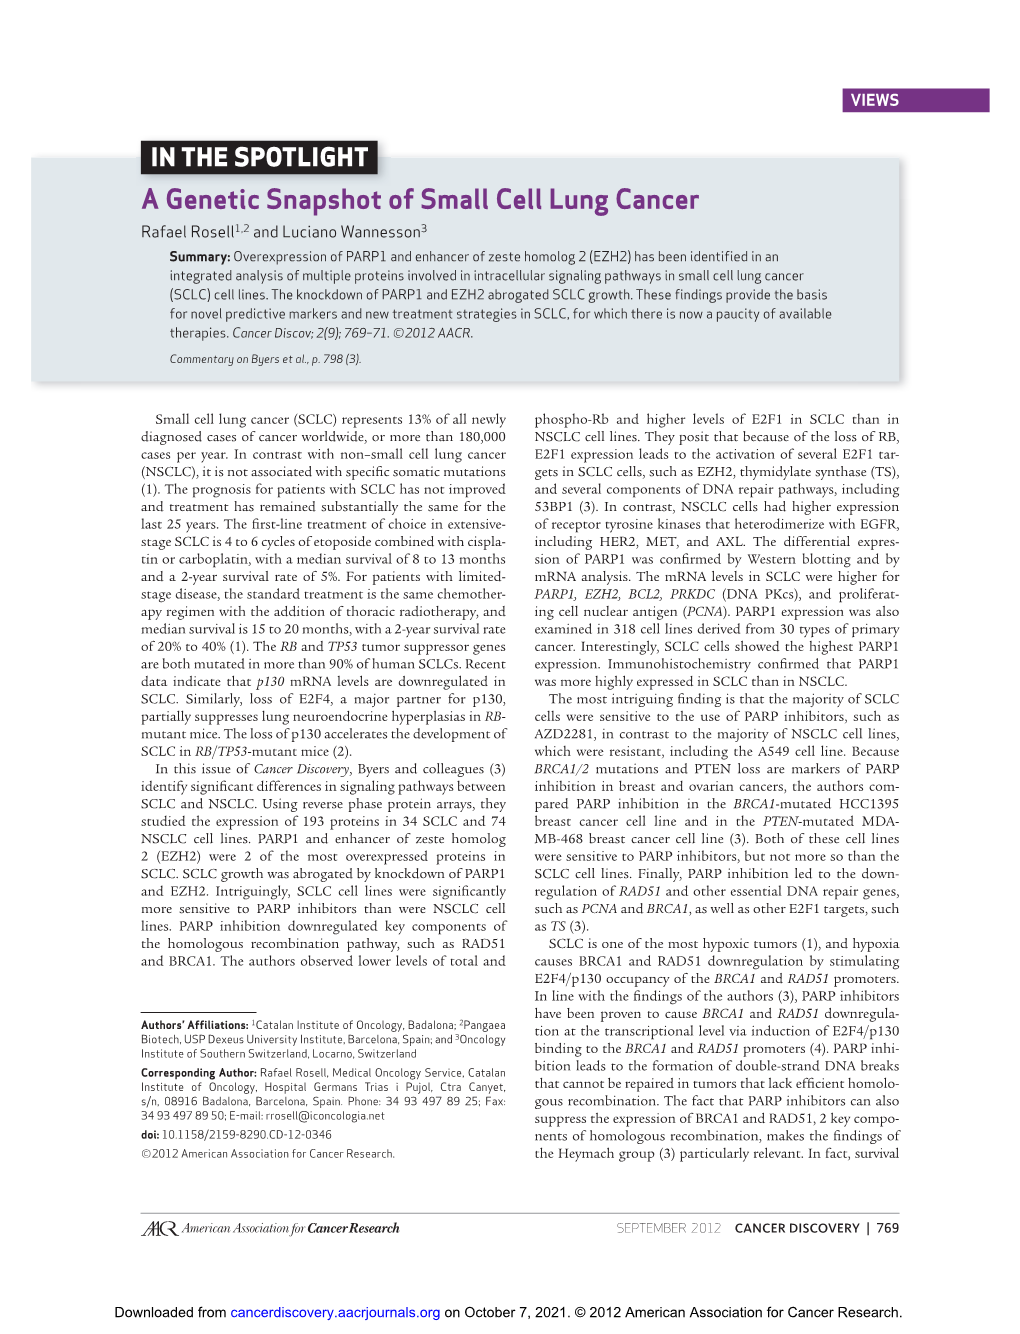 A Genetic Snapshot of Small Cell Lung Cancer